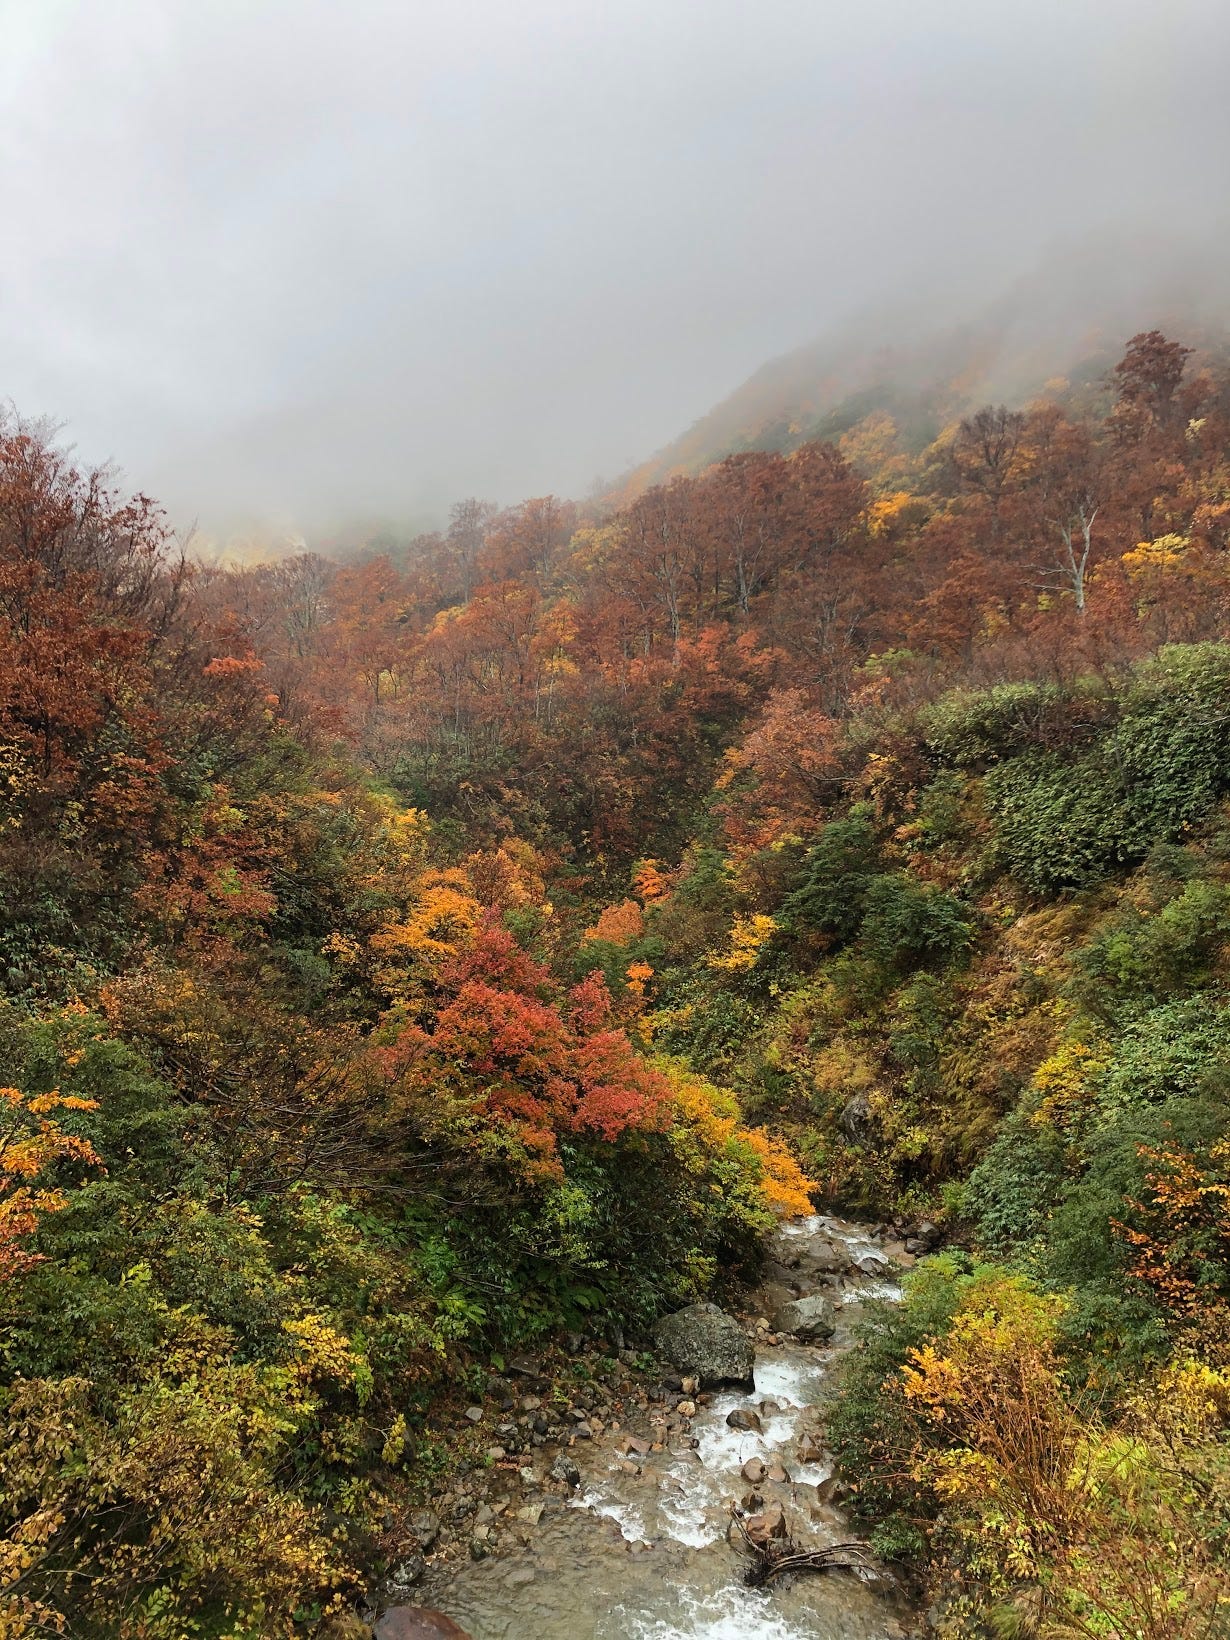 A river flows amongst the autumn foliage on Mt. Yudono. This river gets completely covered with snow in the winter.